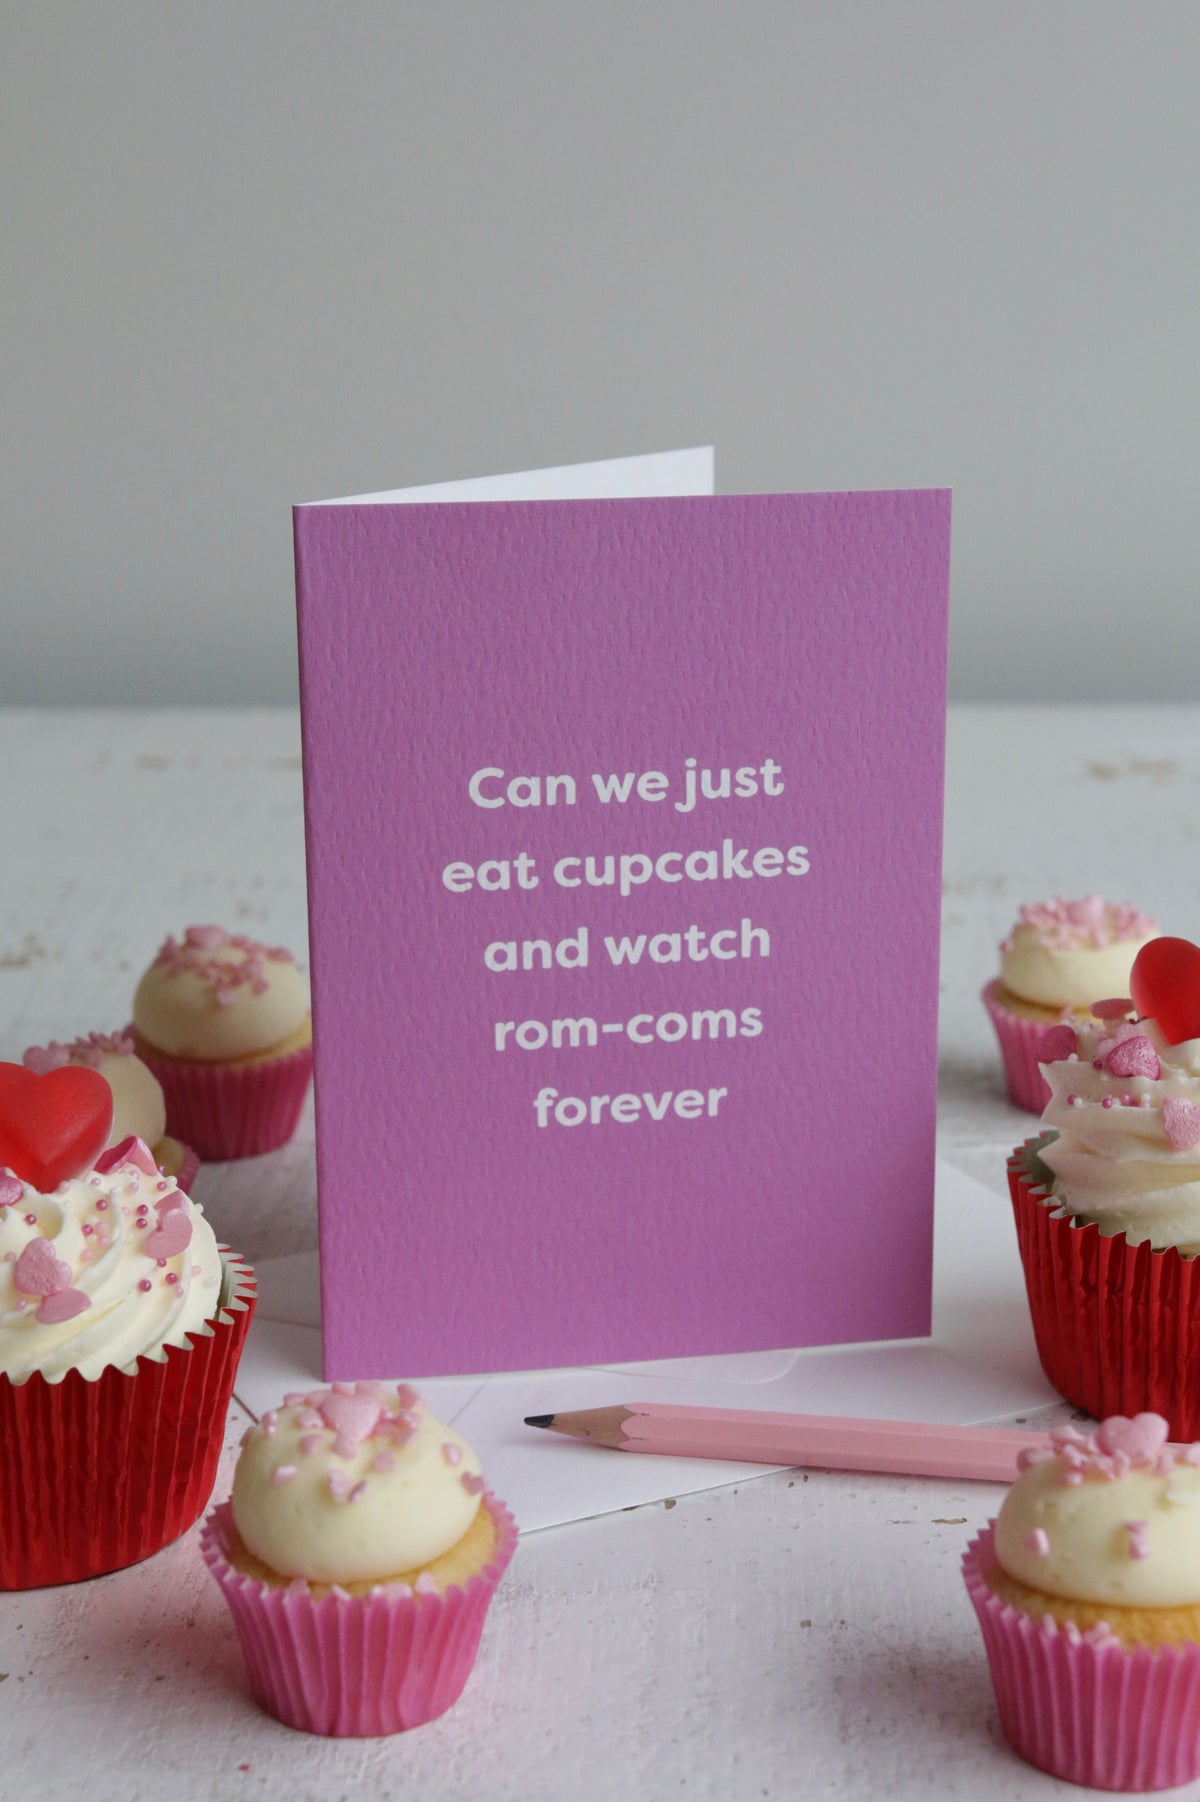 Can We Just Eat Cupcakes And Watch Rom-Coms Forever Card with Cupcakes